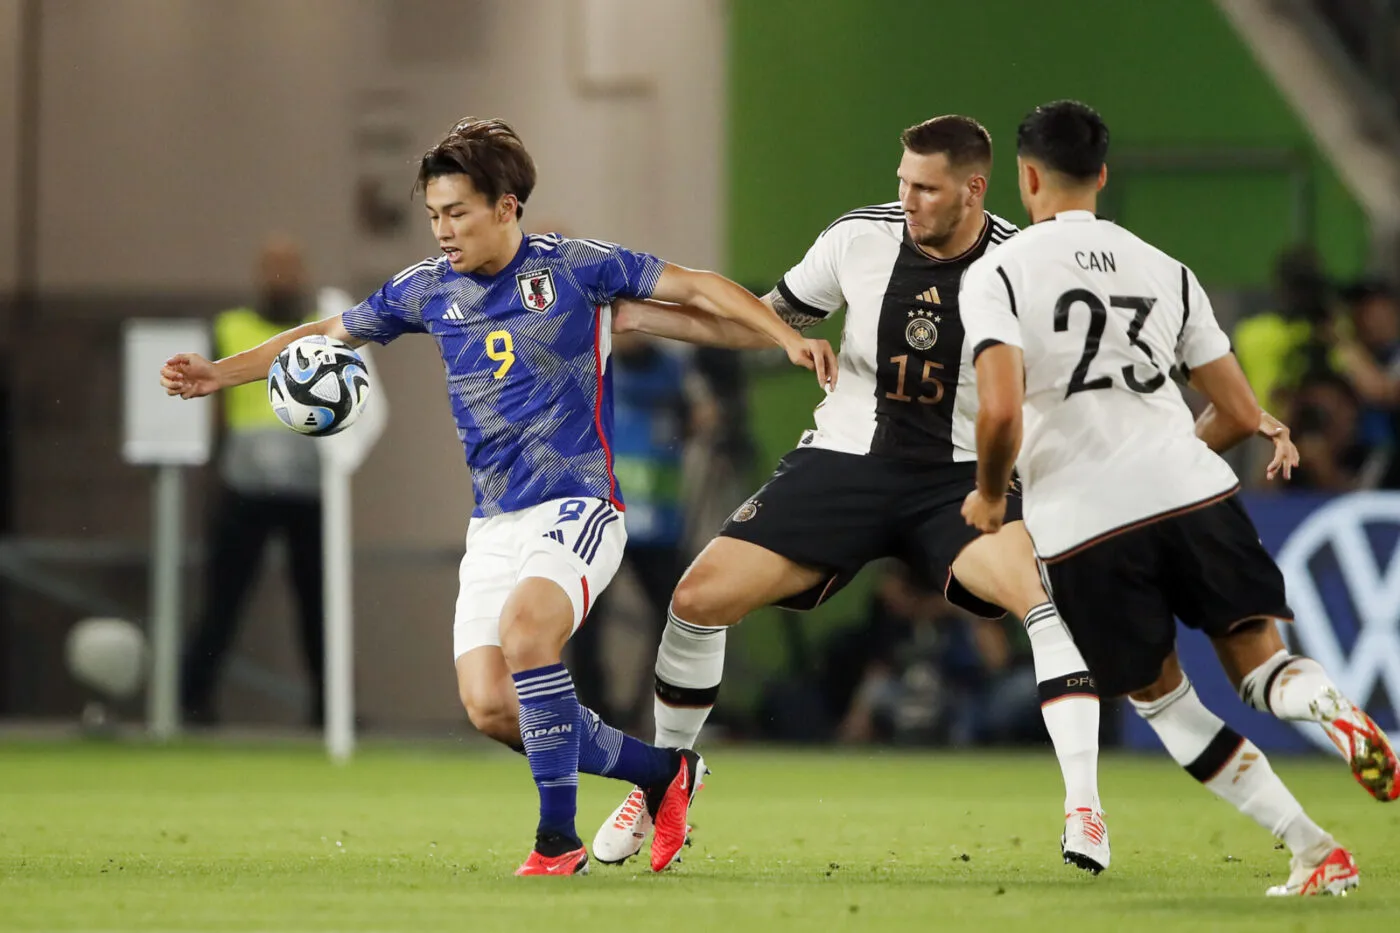 WOLFSBURG - (l-r) Ayase Ueda of Japan, Niklas Sule of Germany, Emre Can of Germany during the friendly Interland match between Germany and Japan at the Volkswagen Arena on September 9, 2023 in Wolfsburg, Germany. ANP | Hollandse Hoogte | BART STOUTJESDIJK - Photo by Icon sport